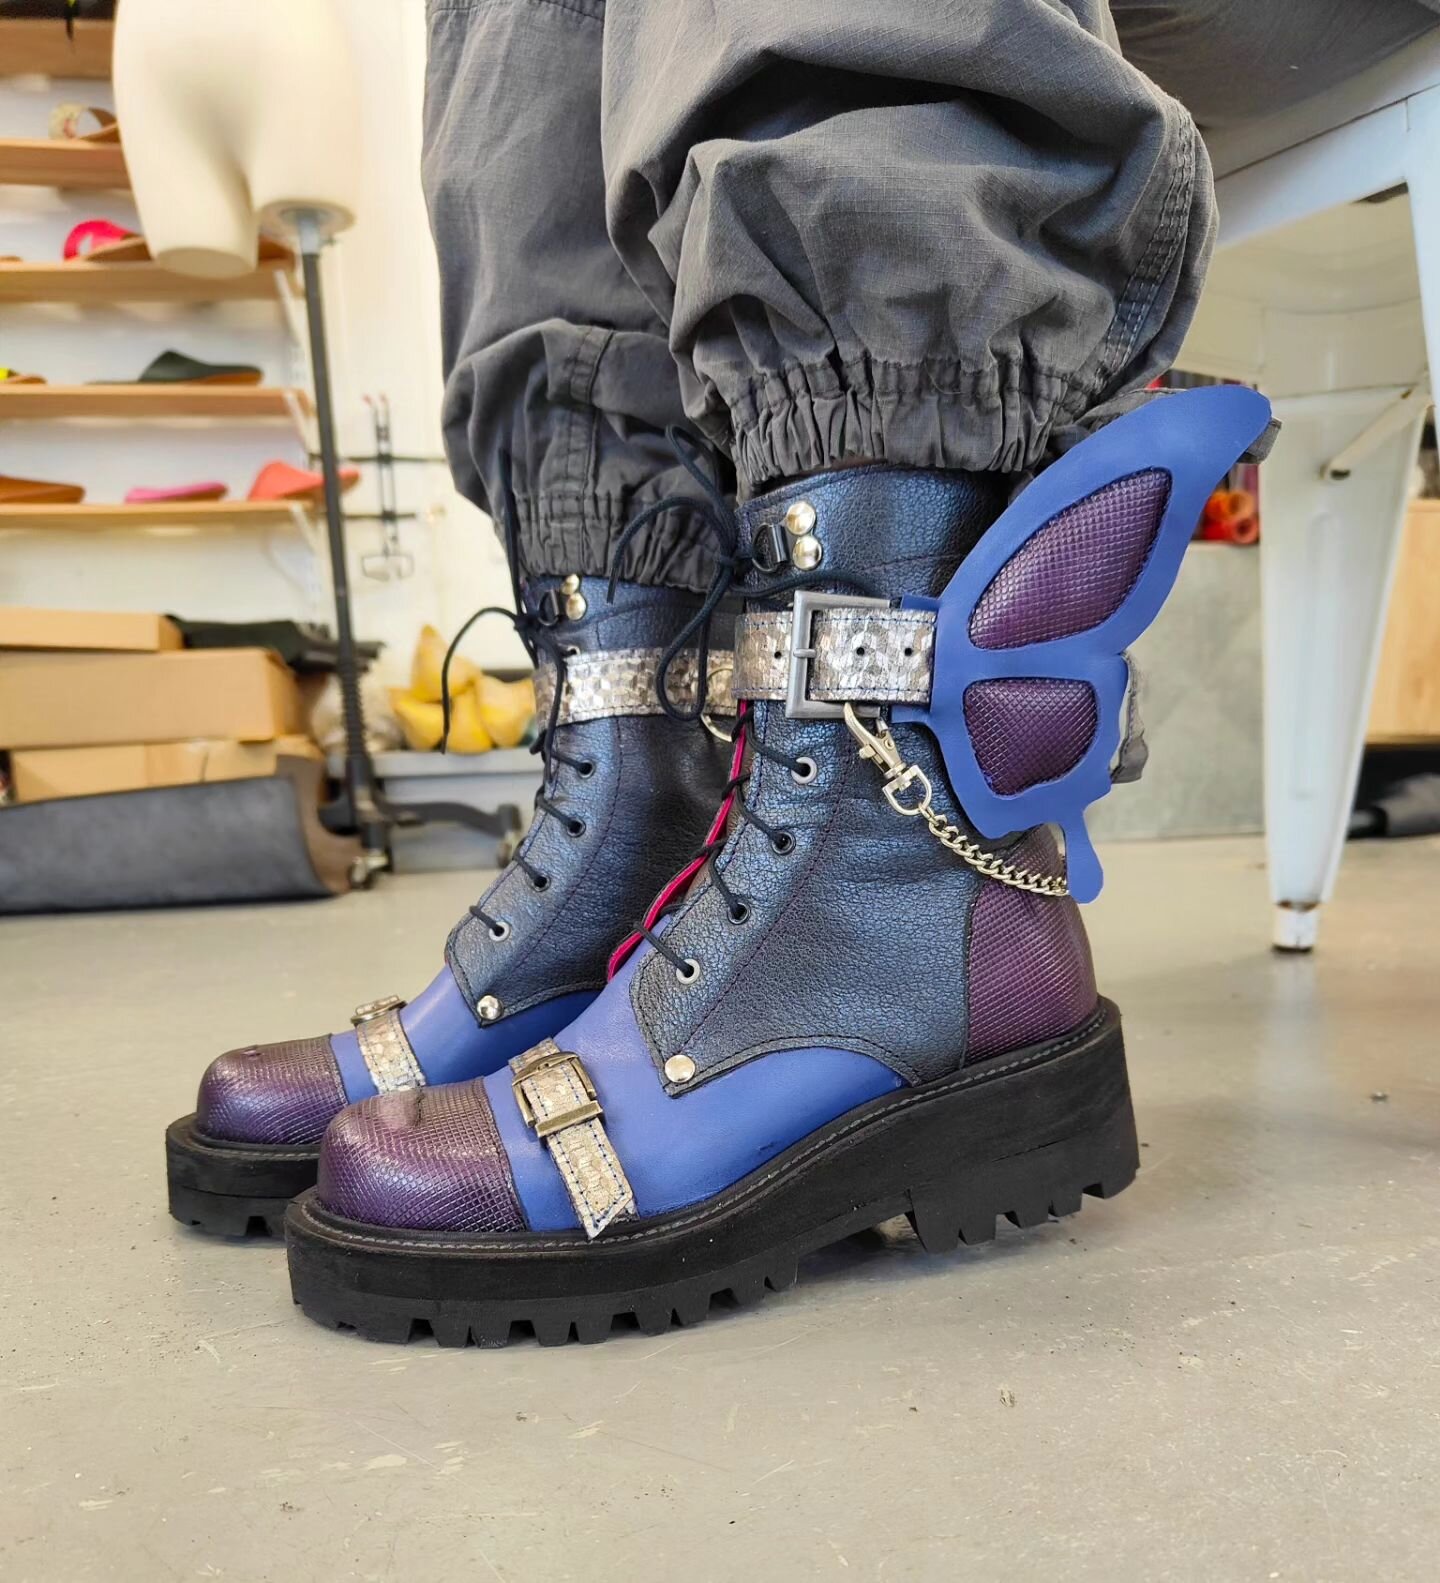 Leaving NZ on a high note with Alet's purple people eater 🦋 boots! 💜

#shoemaking #handmade #learntomakeshoes #4dayboot